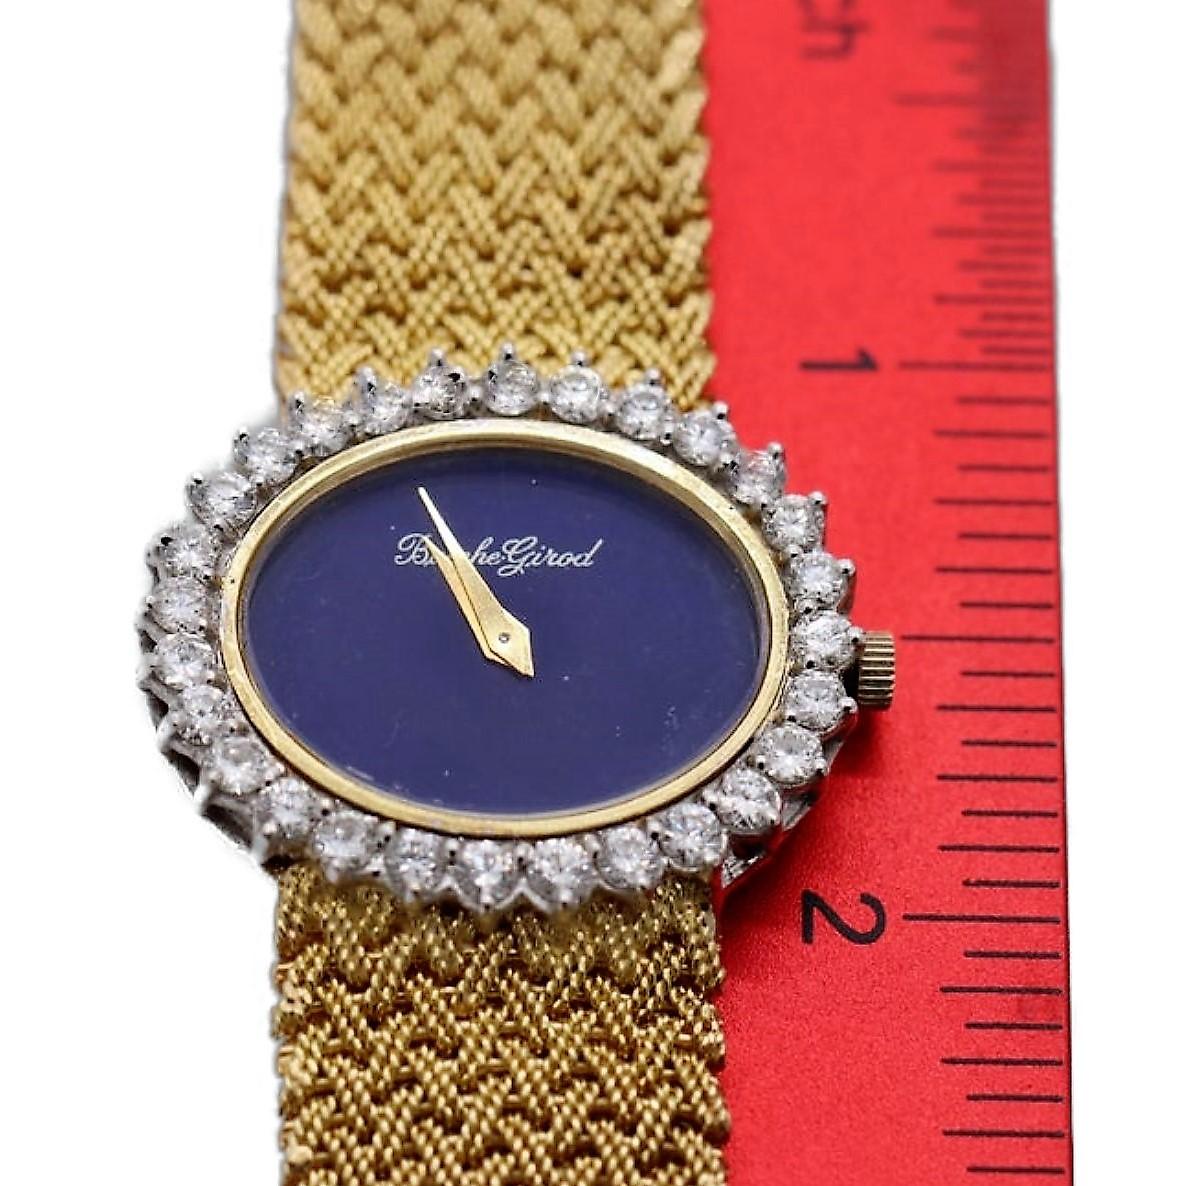 Yellow Gold Ladies Bueche Girod Watch with Oval Lapis Dial and Diamond Bezel 6